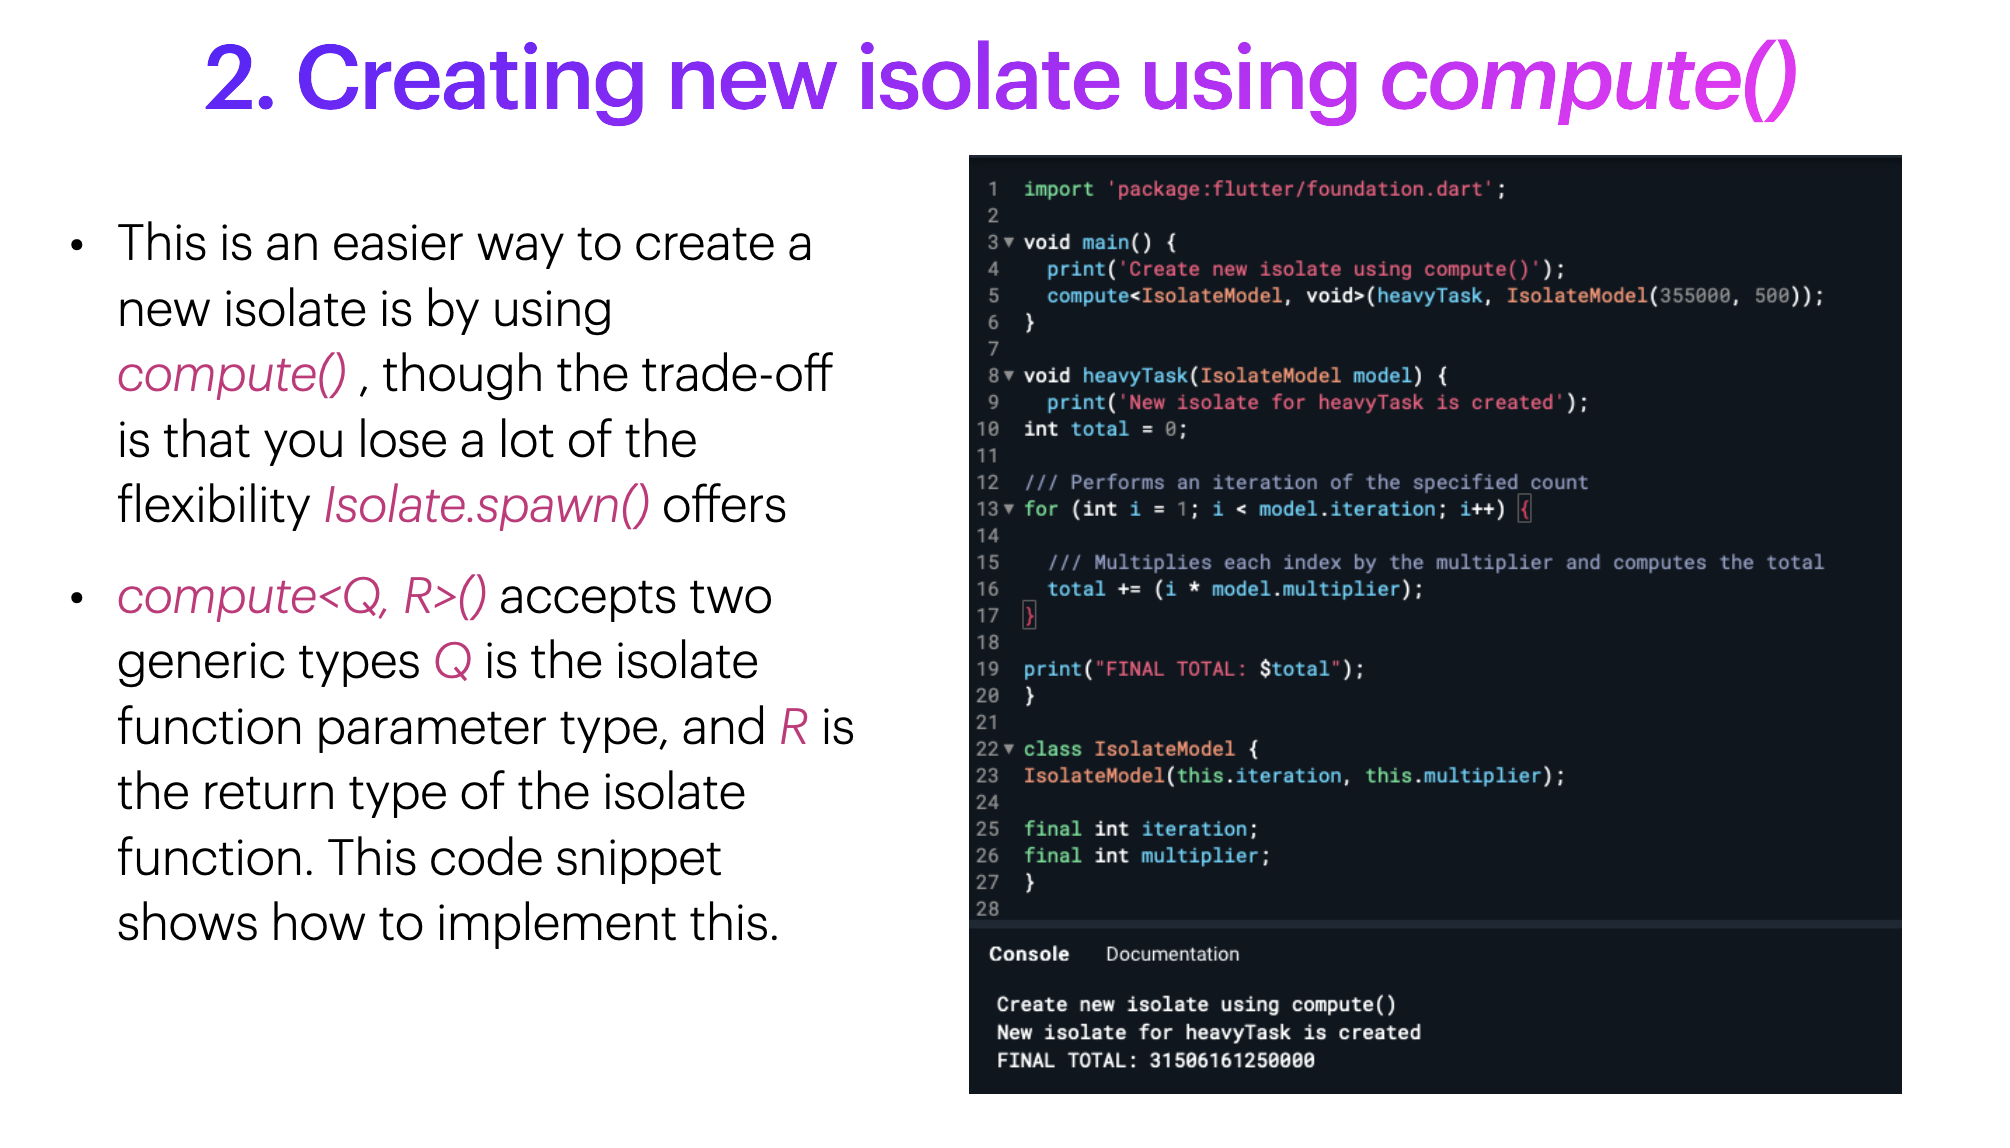 Creating New Isolate Using Compute Function